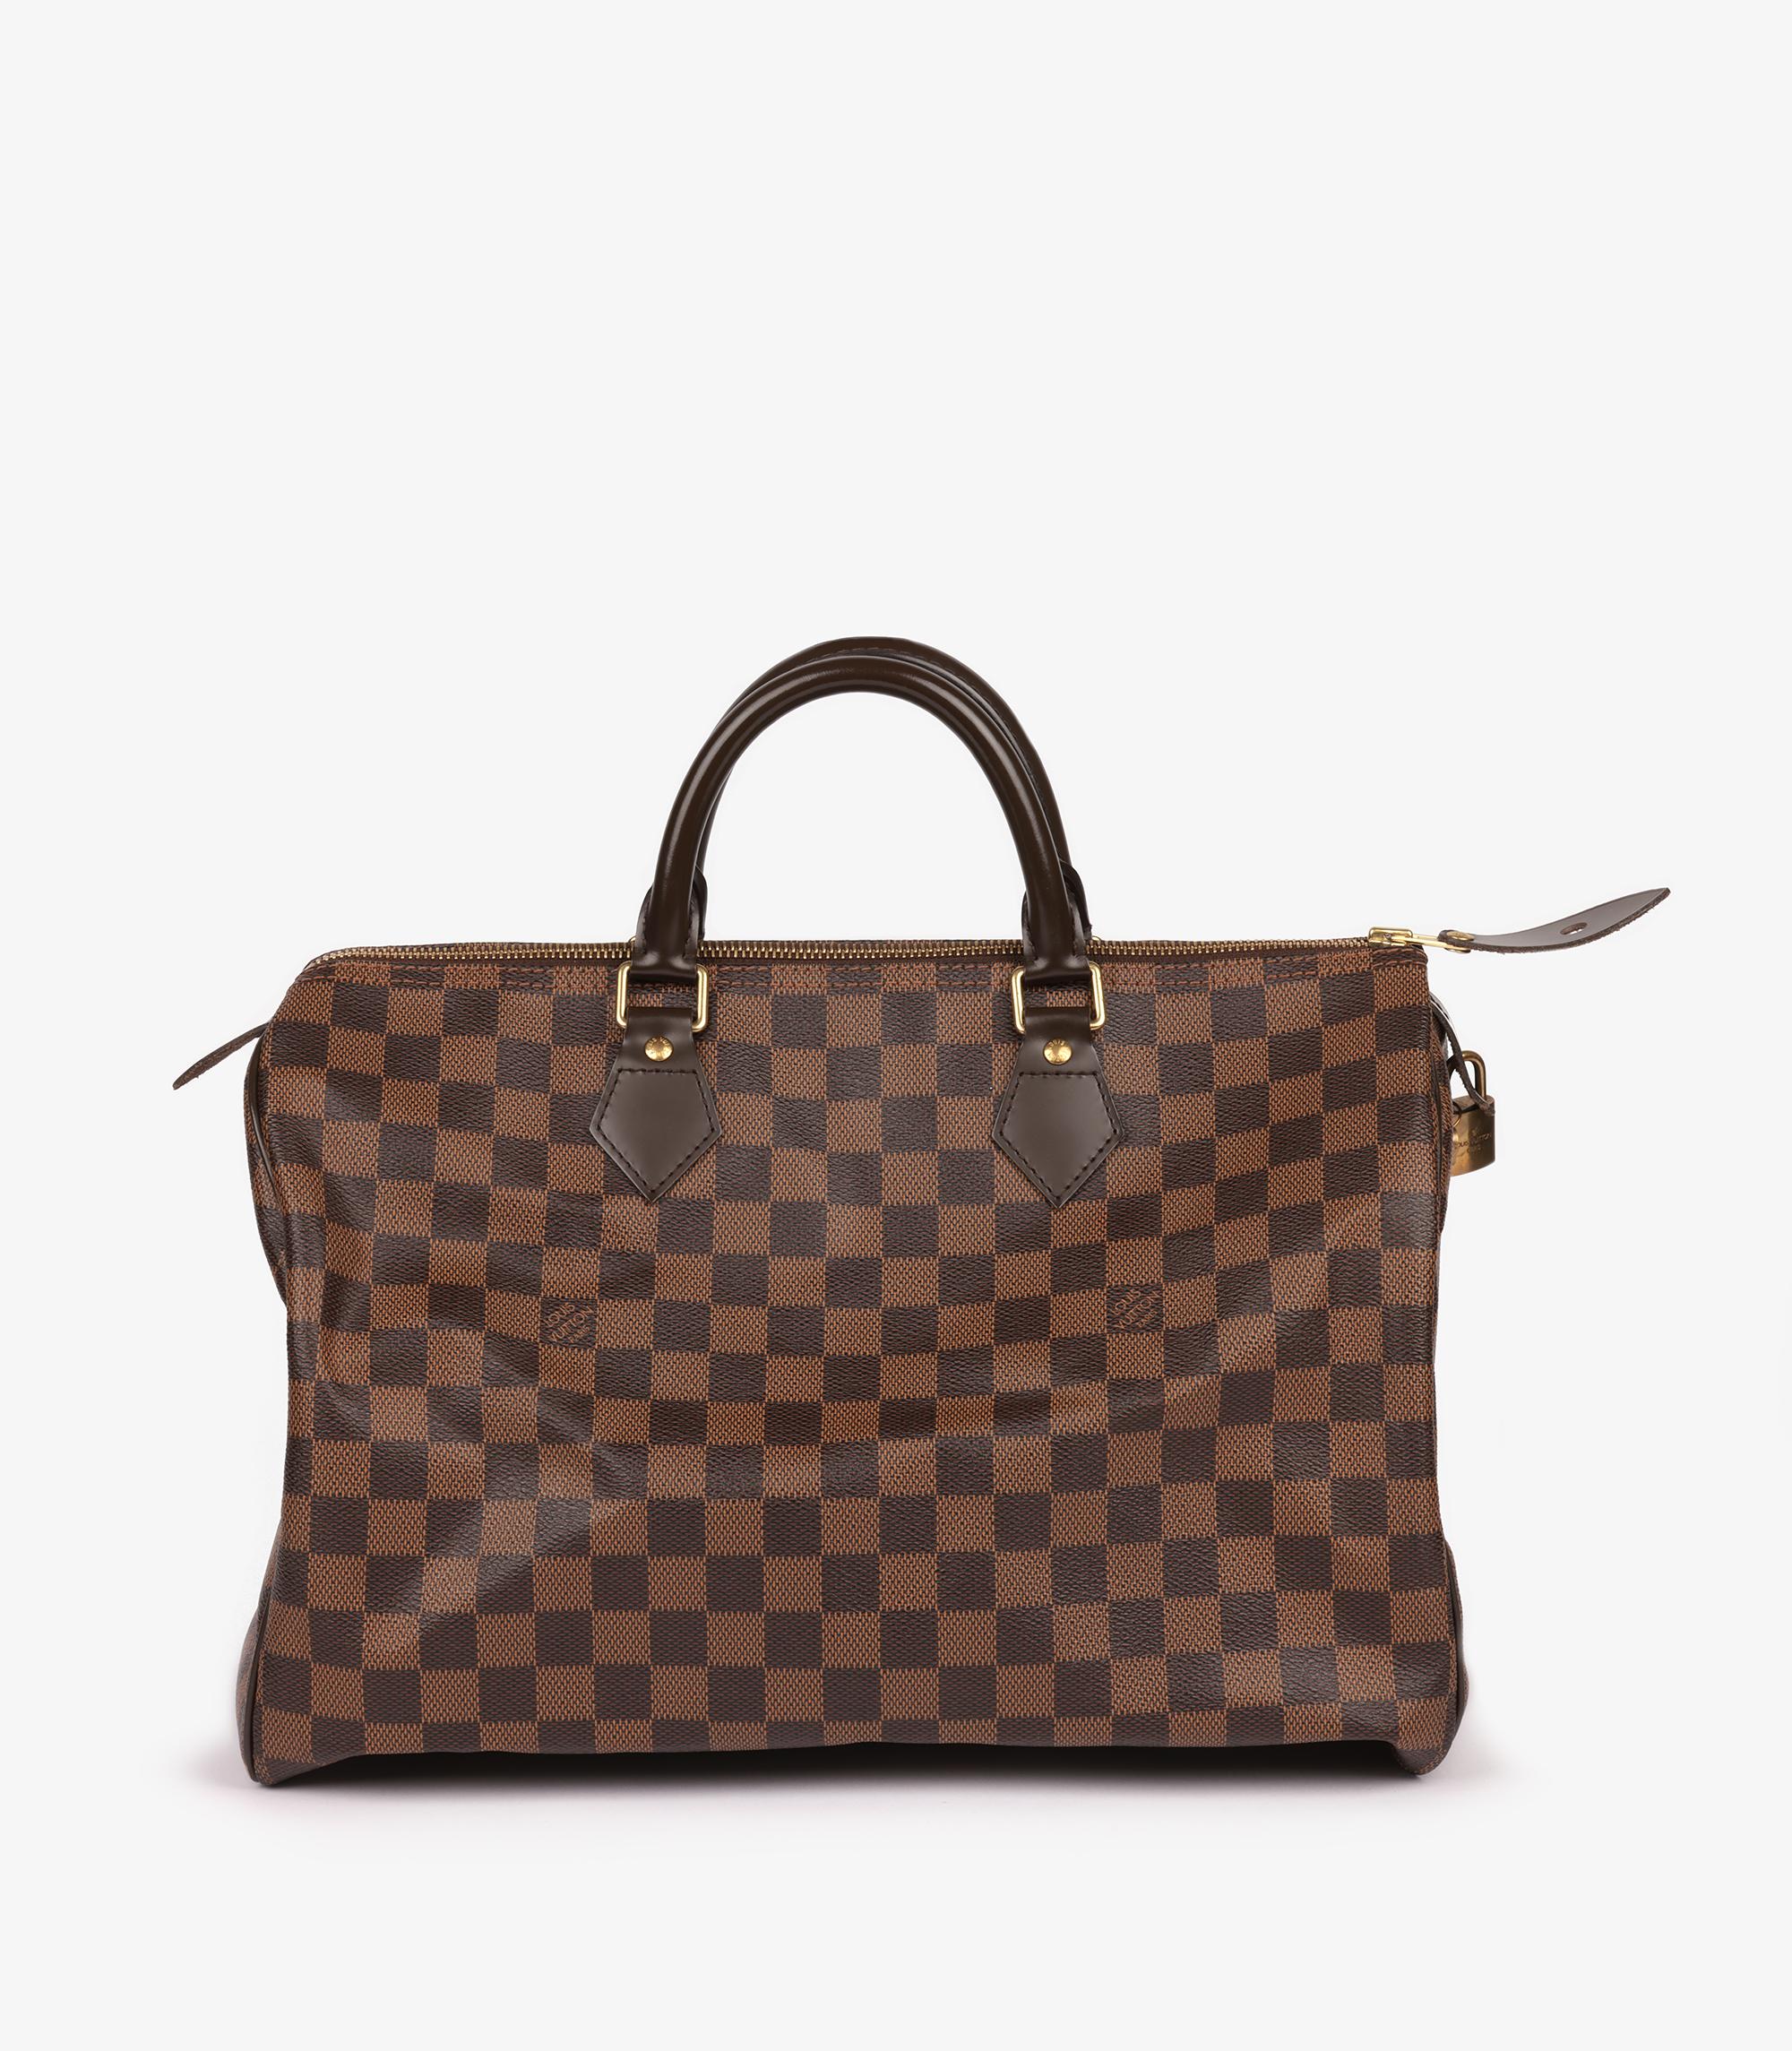 Louis Vuitton Damier Ebene Coated Canvas & Brown Calfskin Leather Speedy 35

Brand- Louis Vuitton
Model- Speedy 35
Product Type- Tote
Serial Number- TR0193
Age- Circa 2013
Accompanied By- Louis Vuitton Box, Dust Bag
Colour- Brown
Hardware- Golden